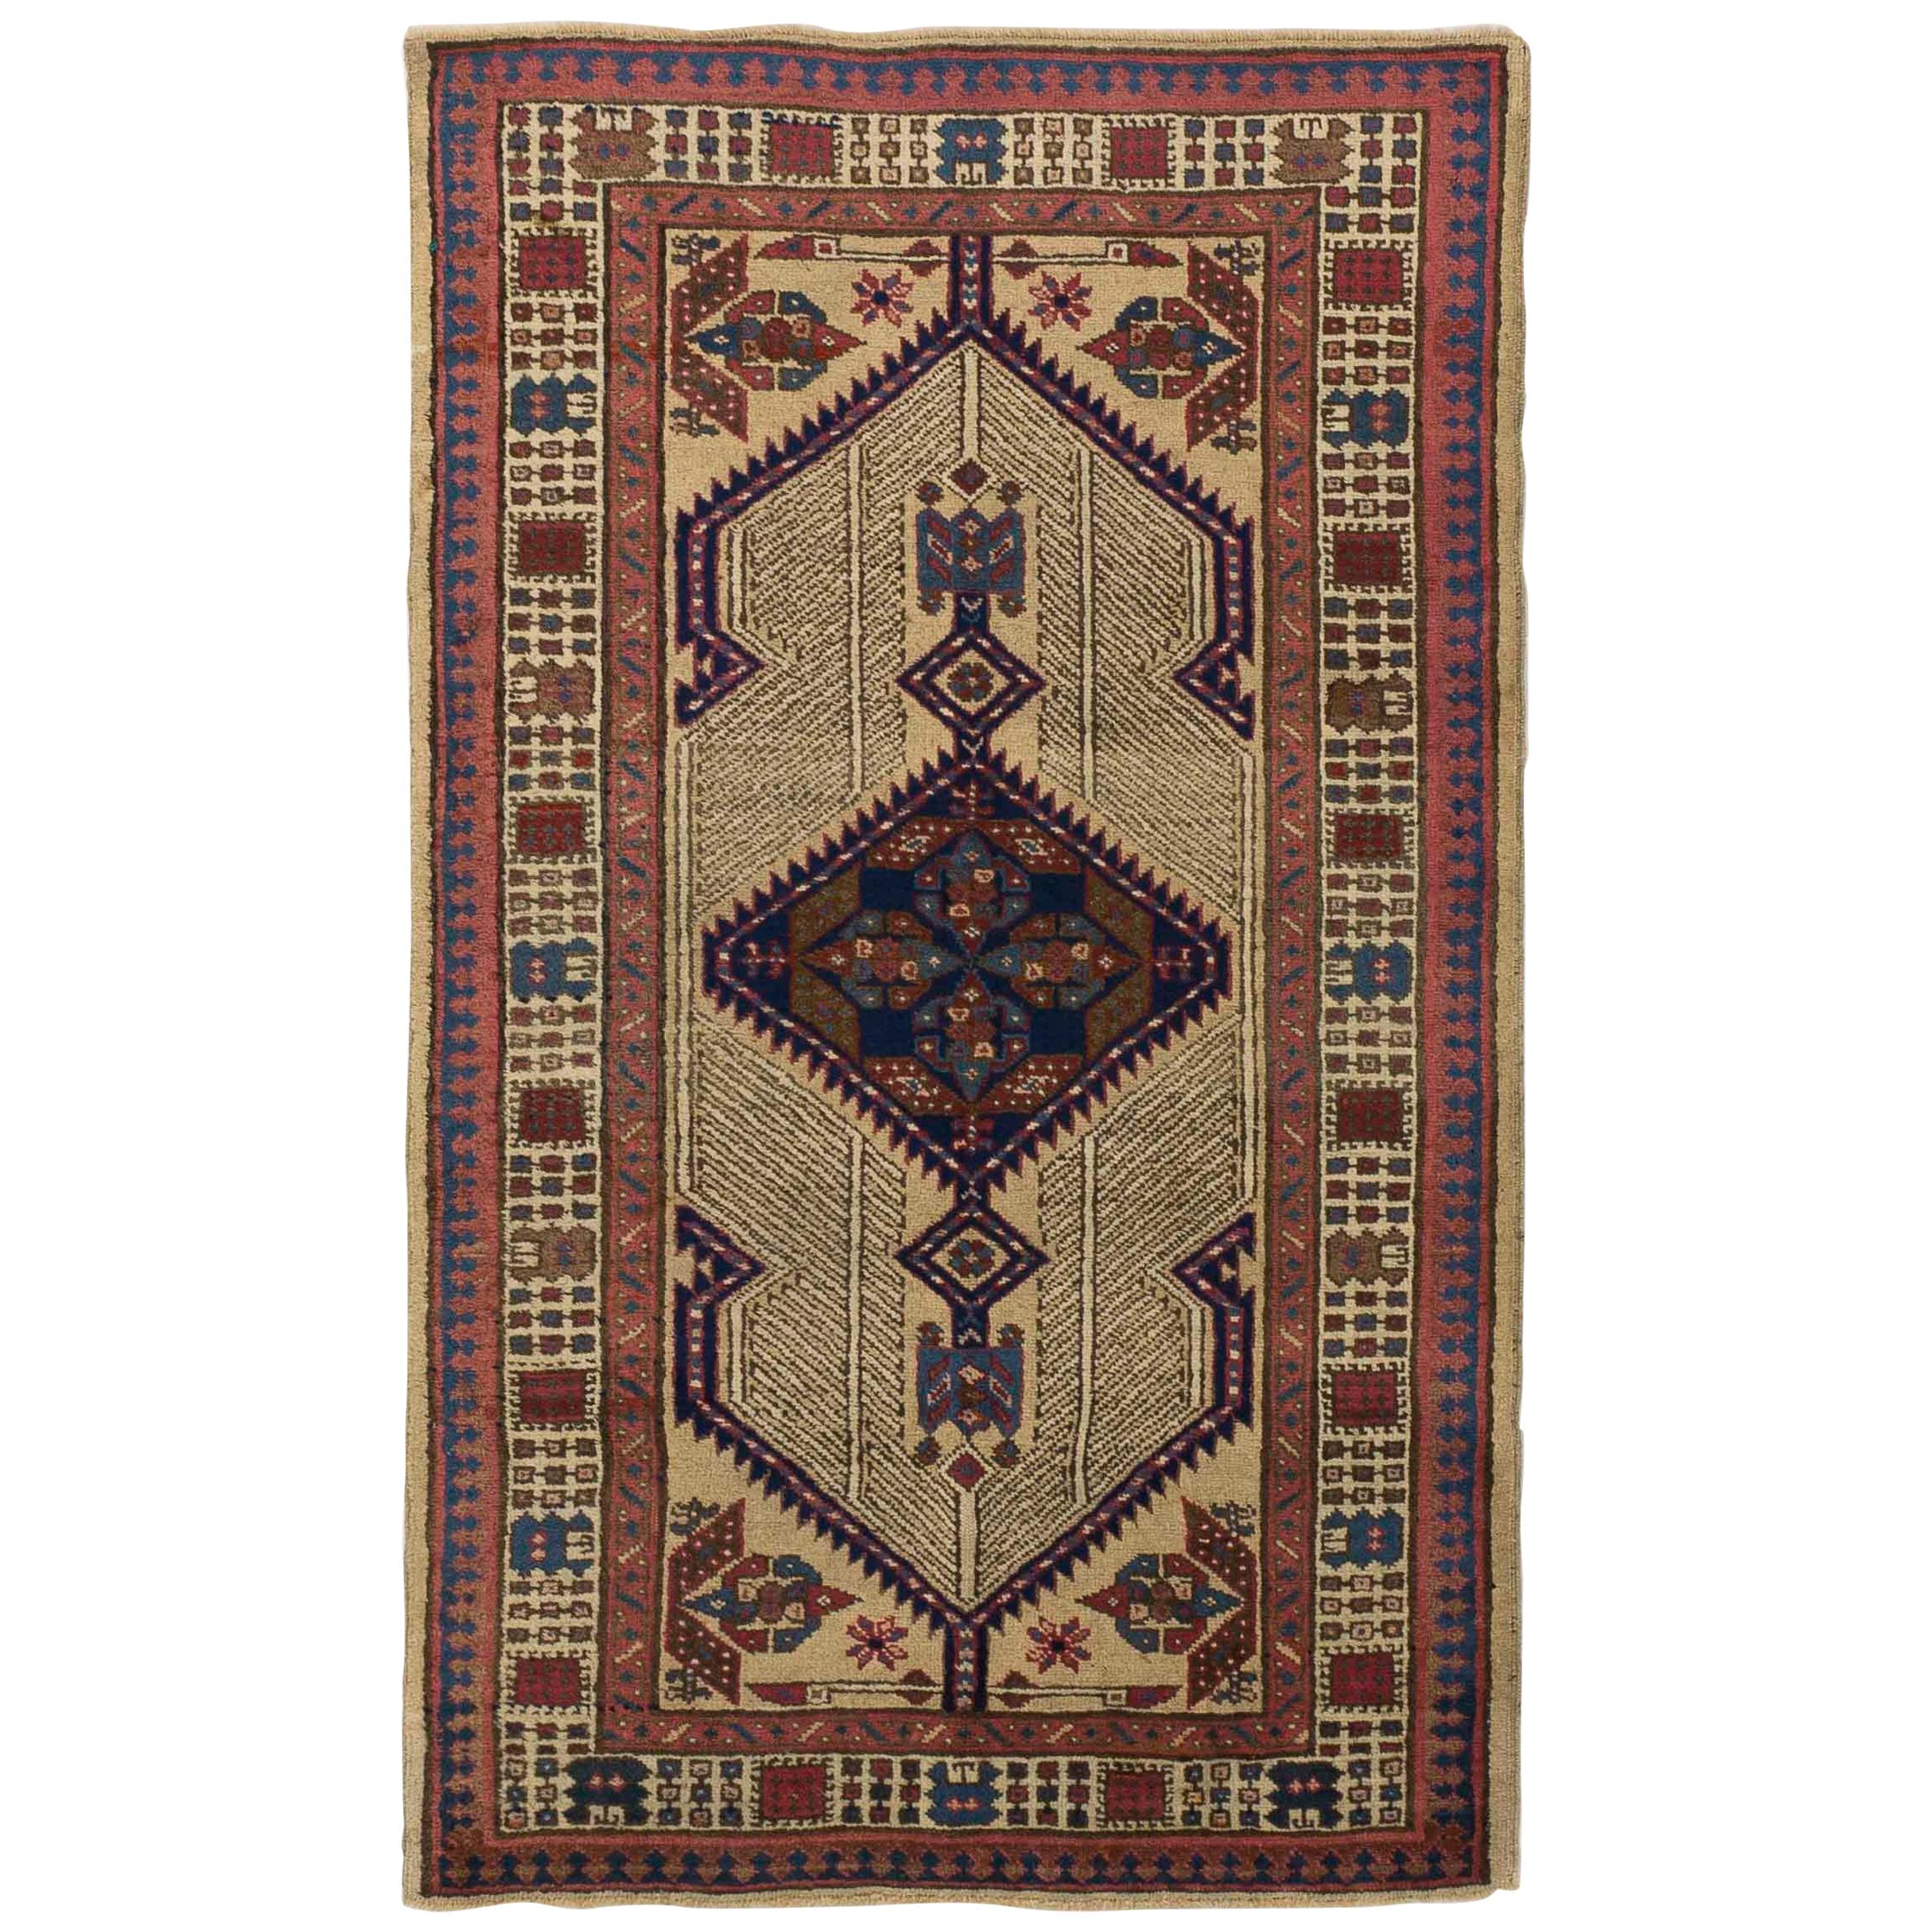 Antique Persian Sarab Rug with Brown and Navy Blue Geometric Patterns